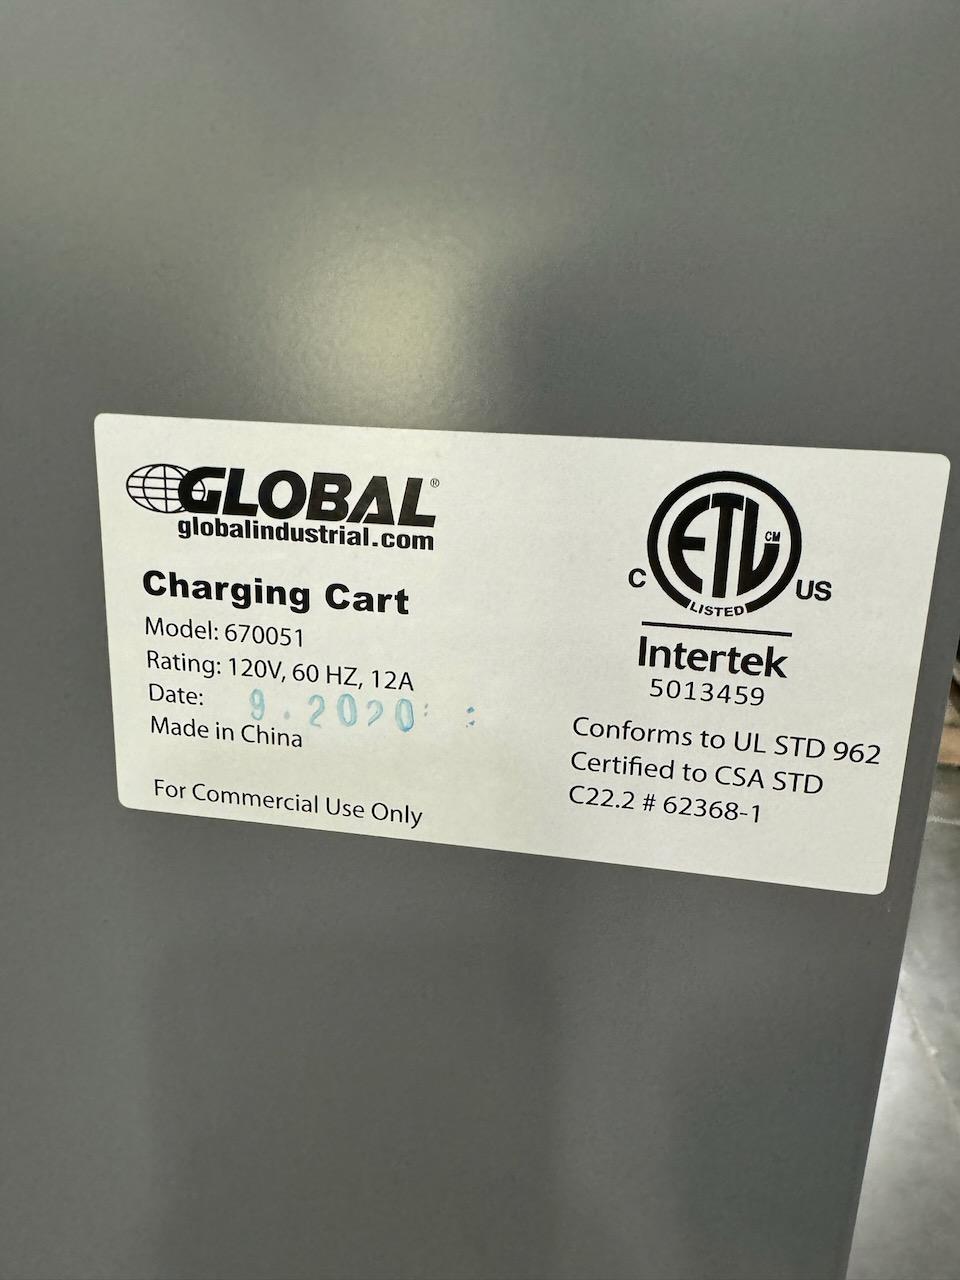 Global Industrial Device Charging Carts